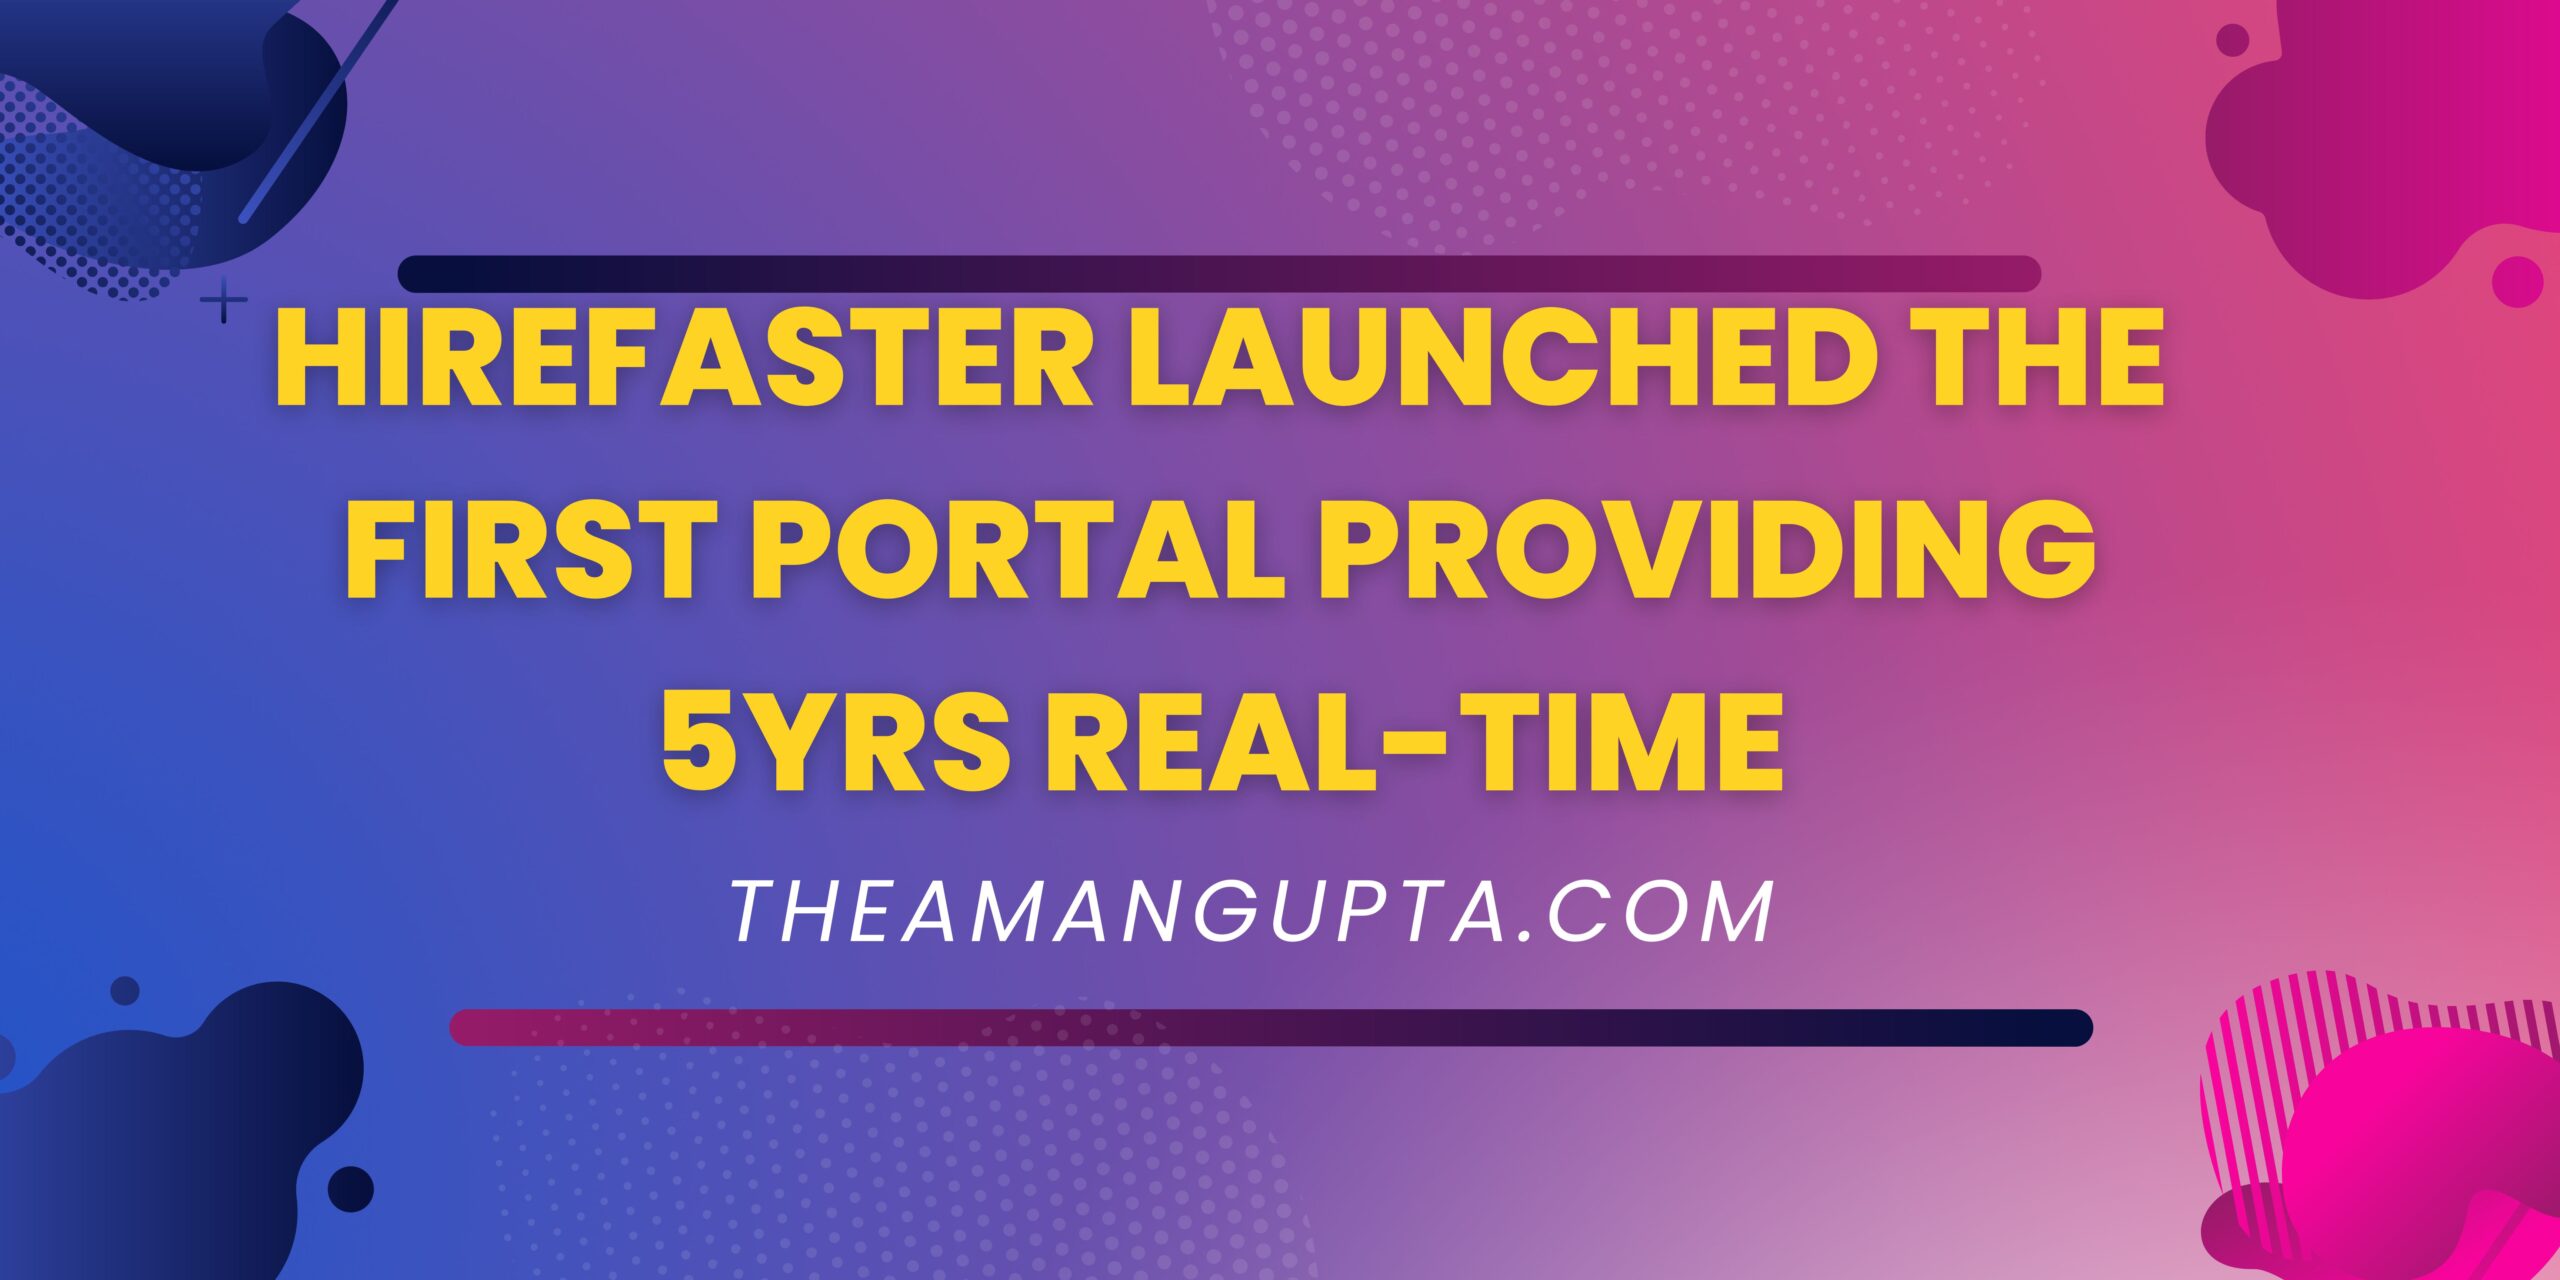 HireFaster Launched The First Portal Providing 5yrs Real-Time|HireFaster|Theamangupta|Theamangupta